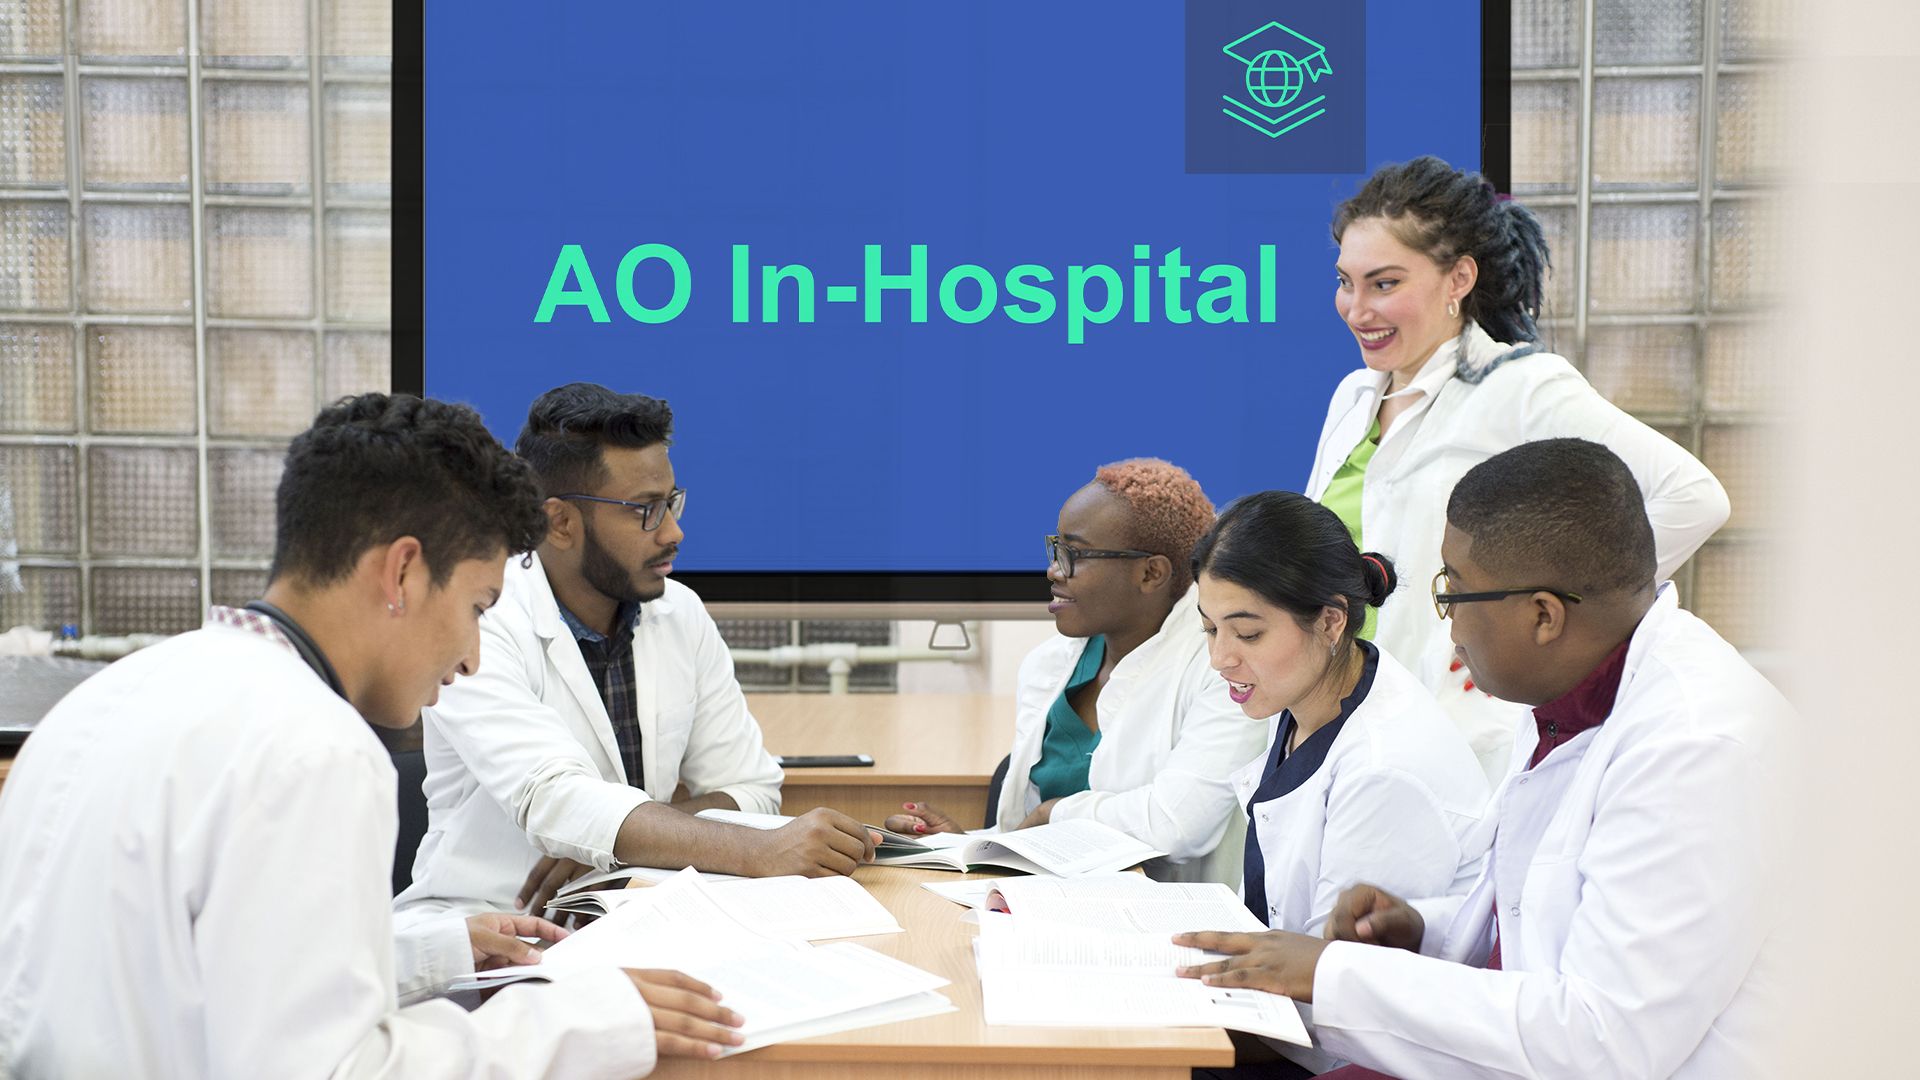 AO In-Hospital debuts new ‘Management of elbow fractures in children’ module 